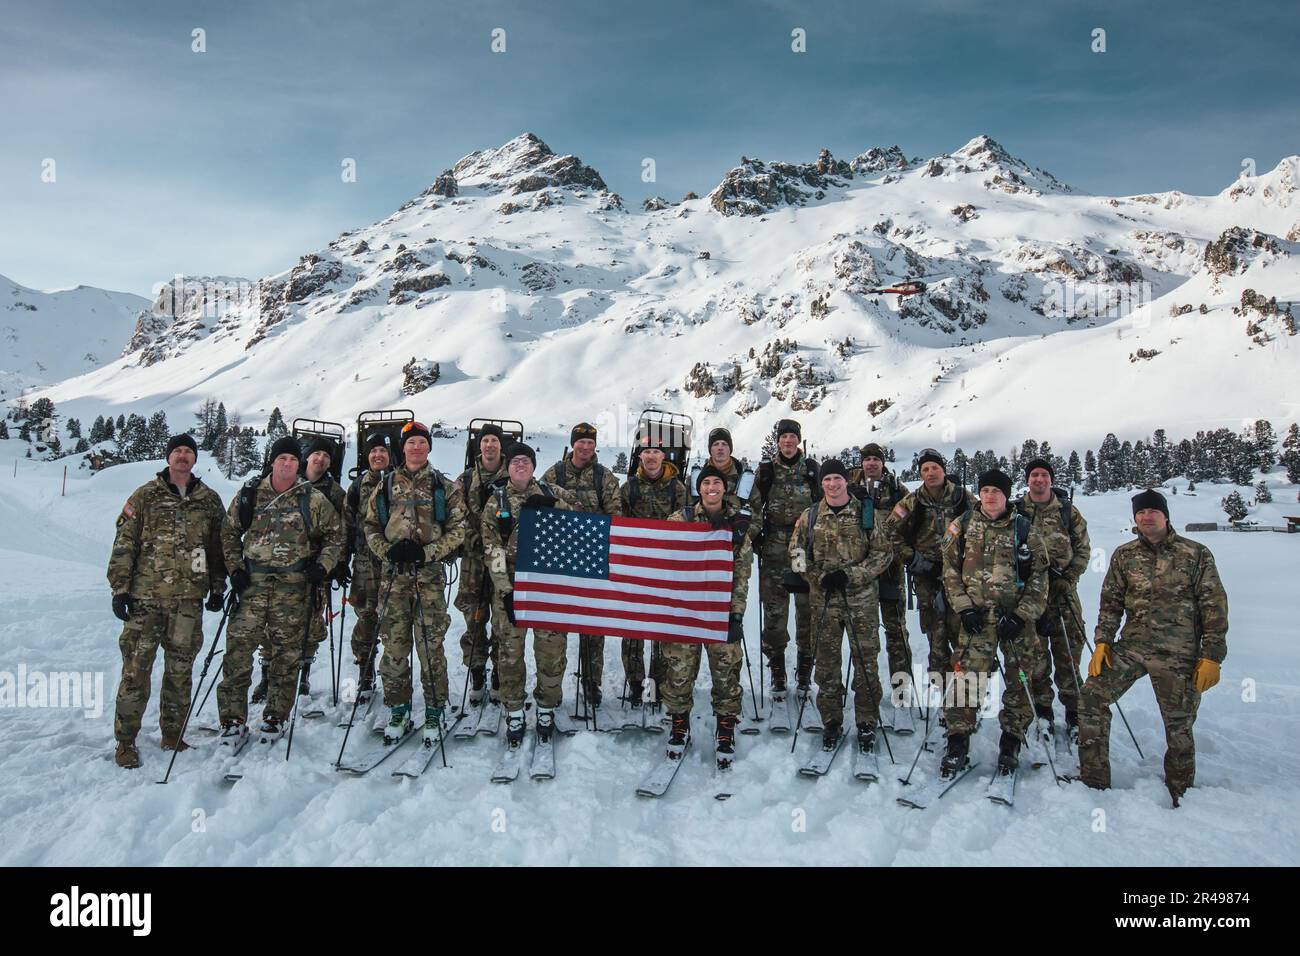 The 2023 U.S. Army Edelweiss Raid Team poses for a photo prior to the start of the 2023 competition, Feb. 28, 2023, Training Area Lizum, Innsbruck, Austria. The 86th Infantry Brigade Combat Team (Mountain) led a team of 16 Soldiers to a 10th and 18th place finish out of a field of 22 teams in 2023. Stock Photo